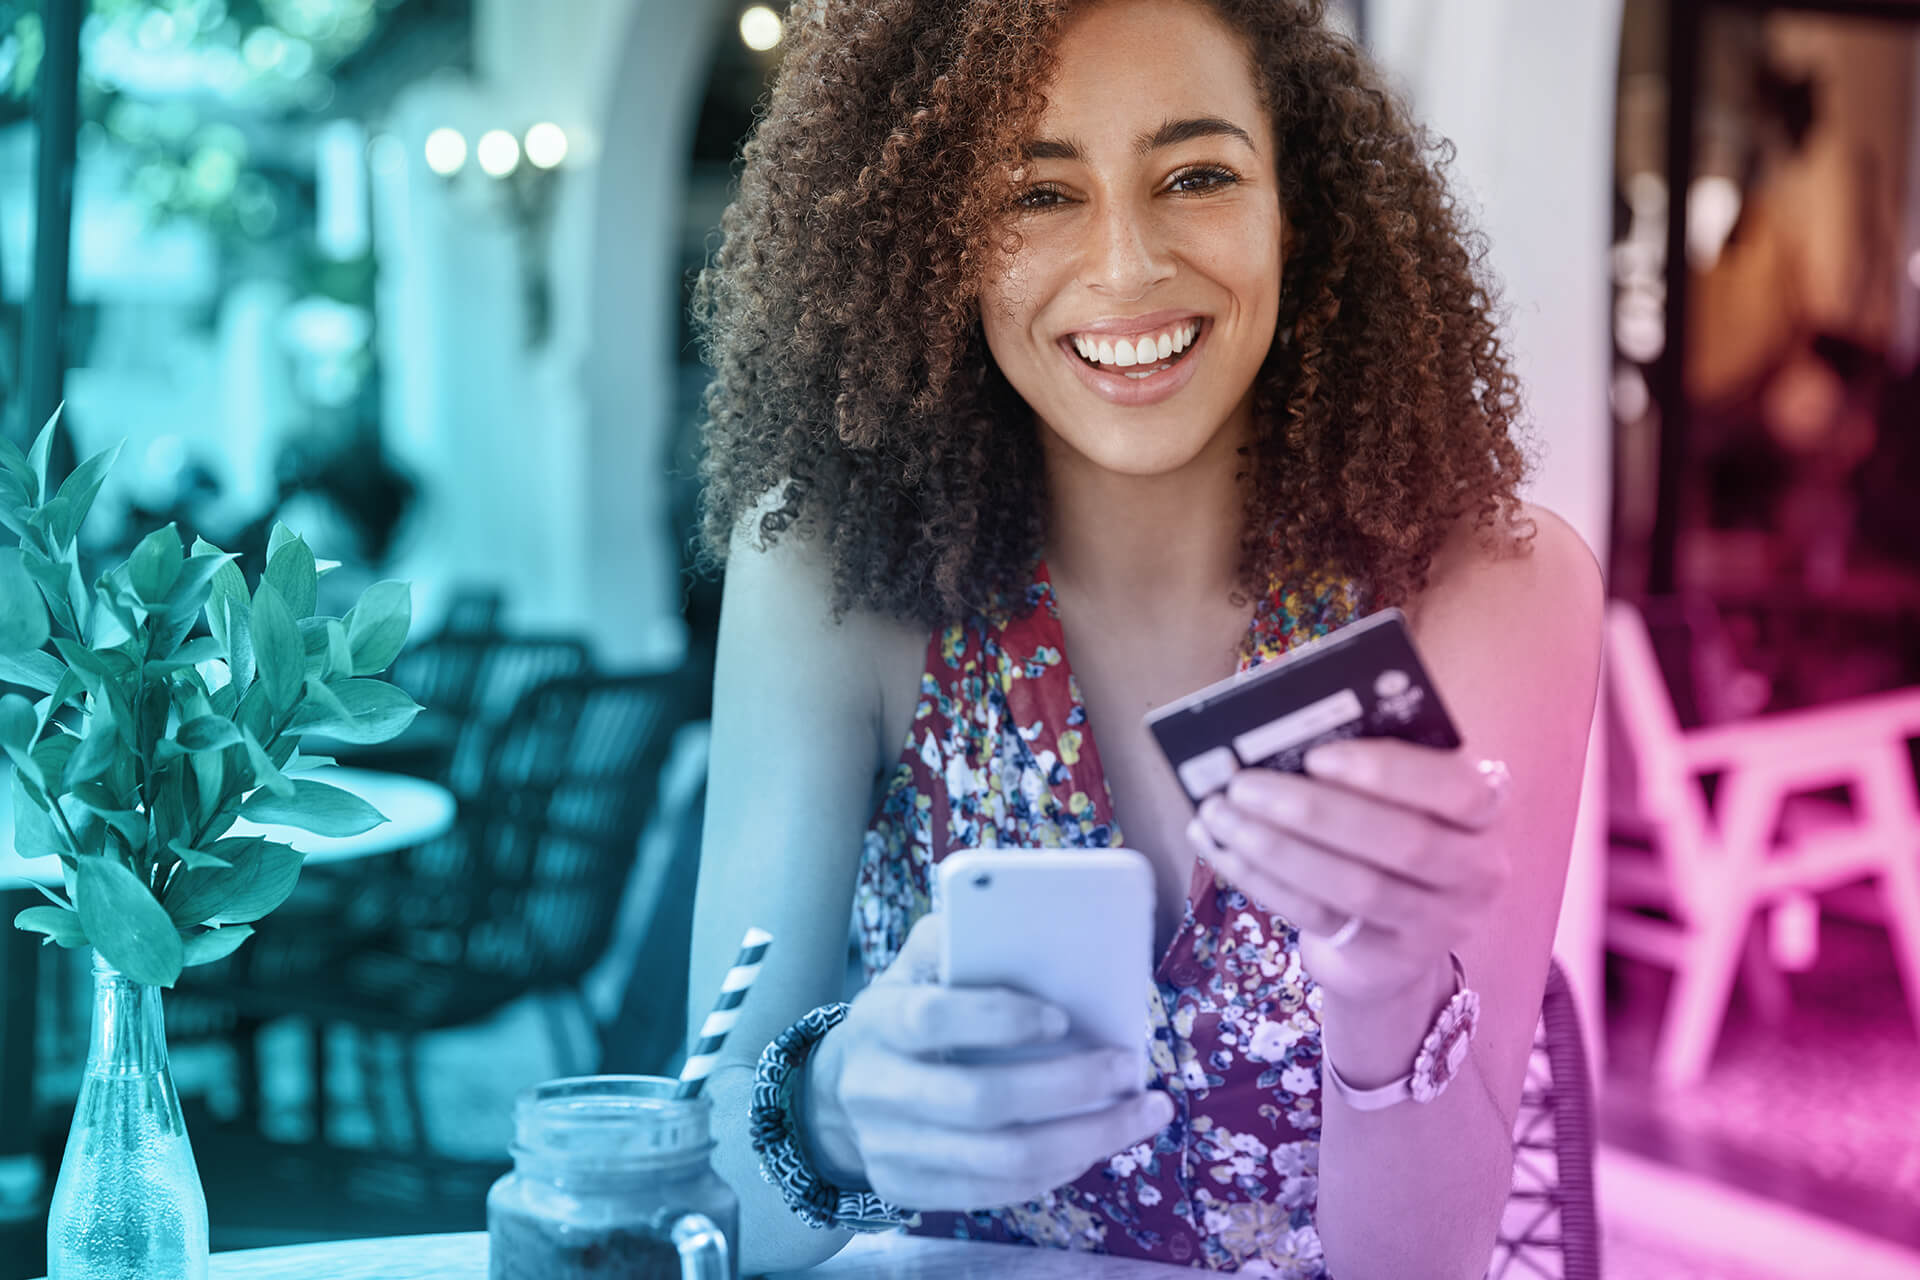 internet-banking-ecommerce-concept-happy-young-smiling-female-with-afro-hairstyle-uses-modern-cell-phone-credit-card-online-shopping (1)-1